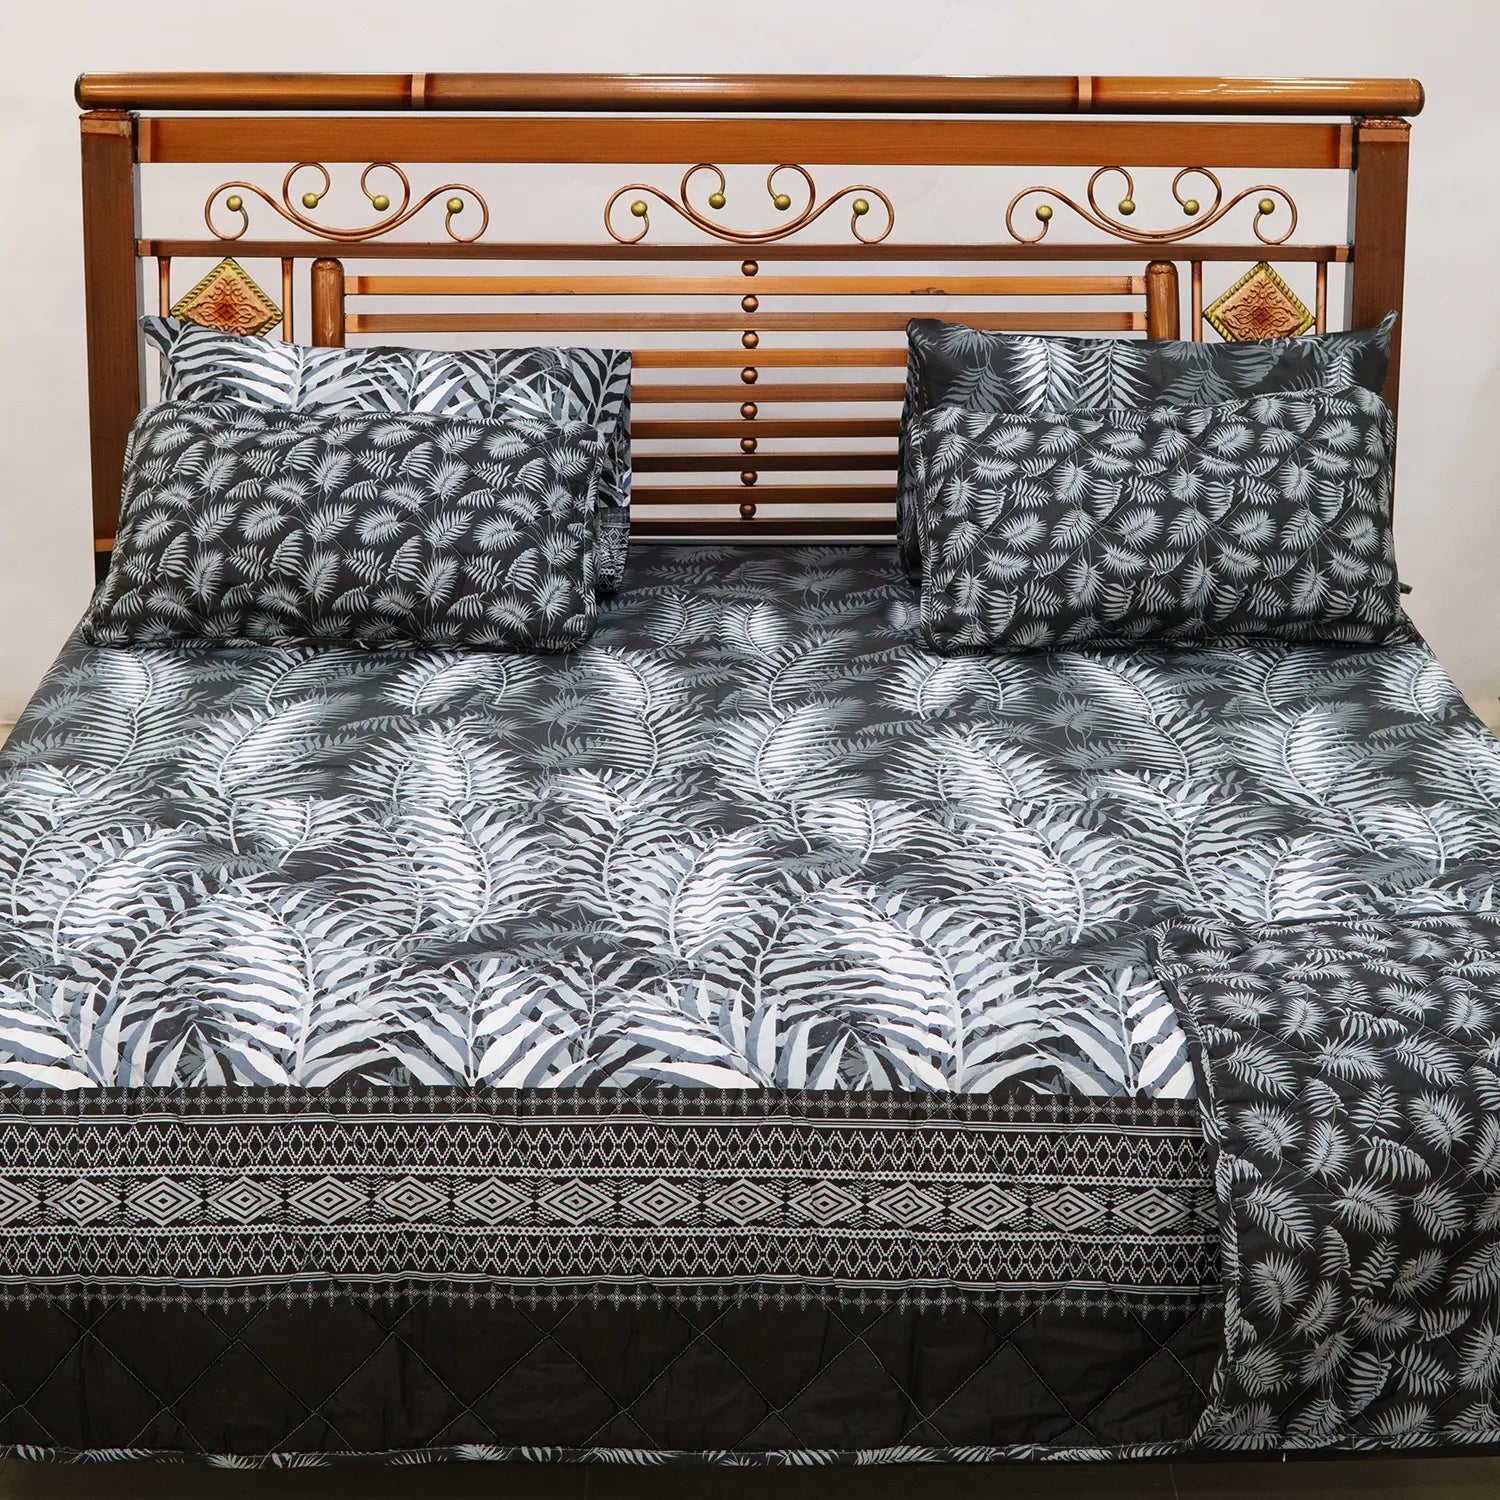 Soft and Stylish Bed Sheet Set with Pillow Covers: Enhance Your Bedroom Décor Effortlessly